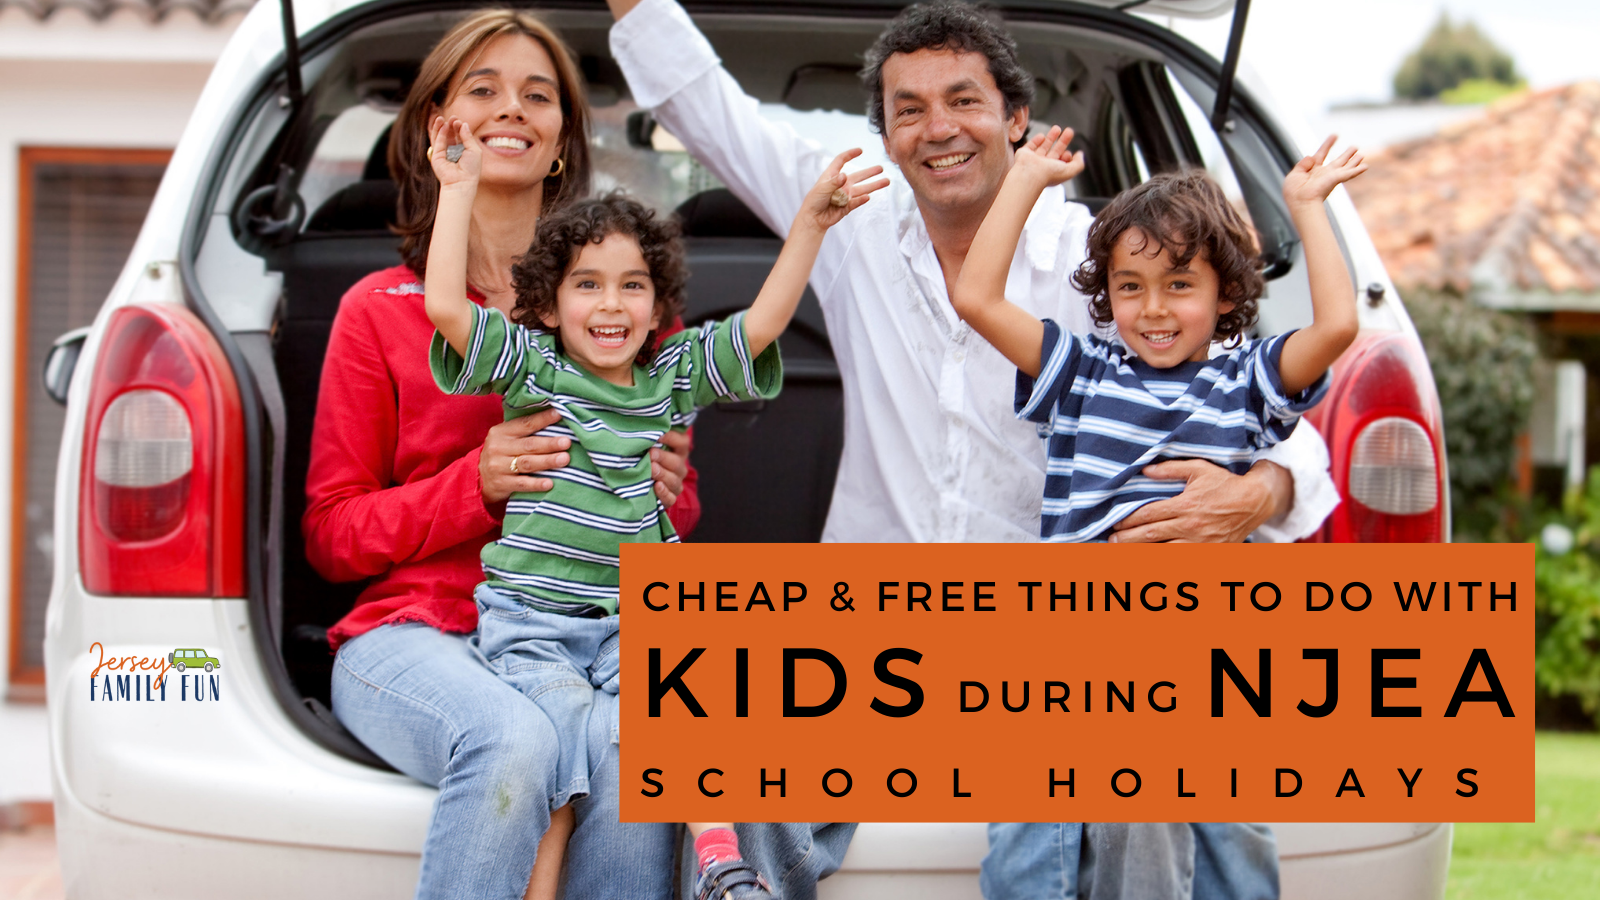 Cheap and Free Things to do with your kids during NJEA School Holidays Image for (Twitter Post)